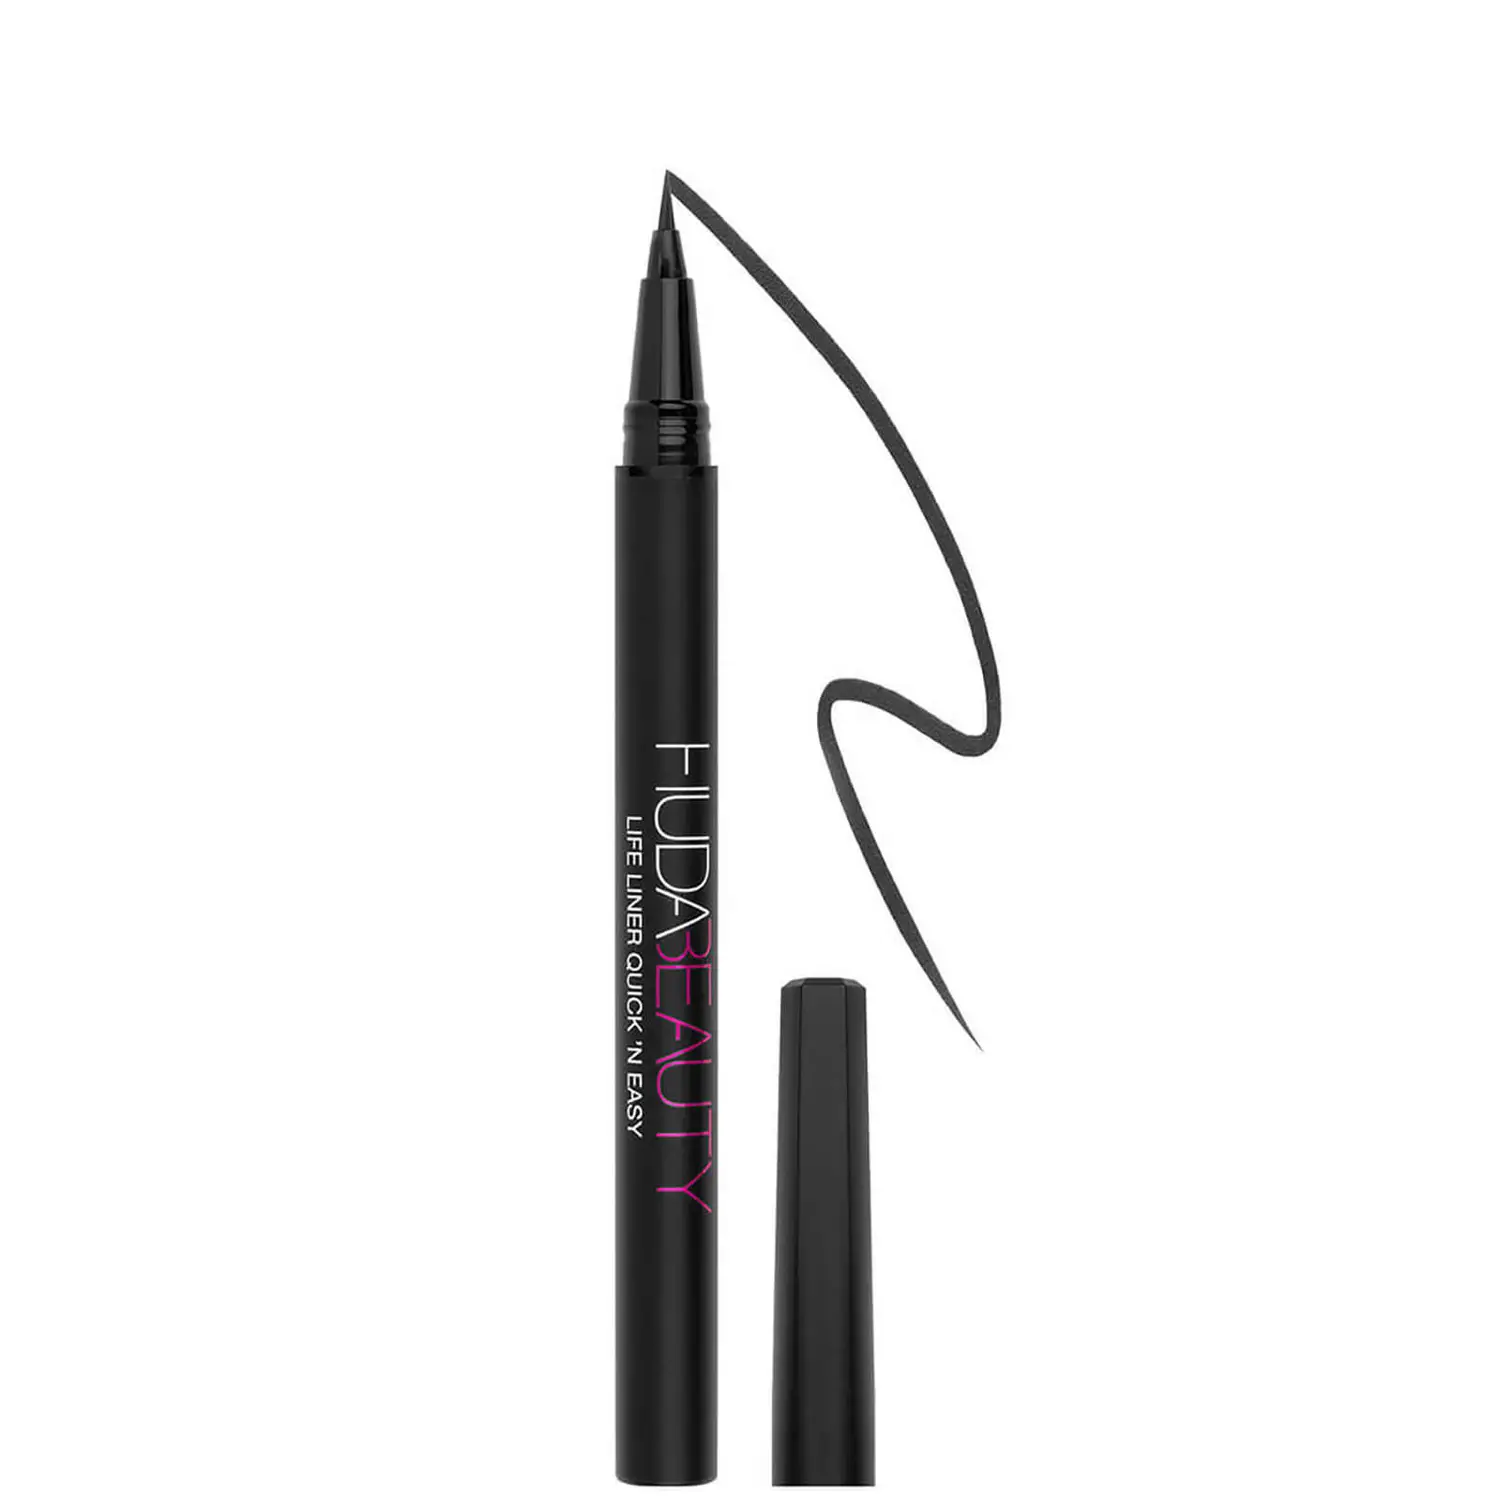 HUDA BEAUTY QUICK ‘N EASY PRECISION LIQUID LINER - FULL SIZE 26 Reviews , See all reviews Earn 16 Status Points £16.00